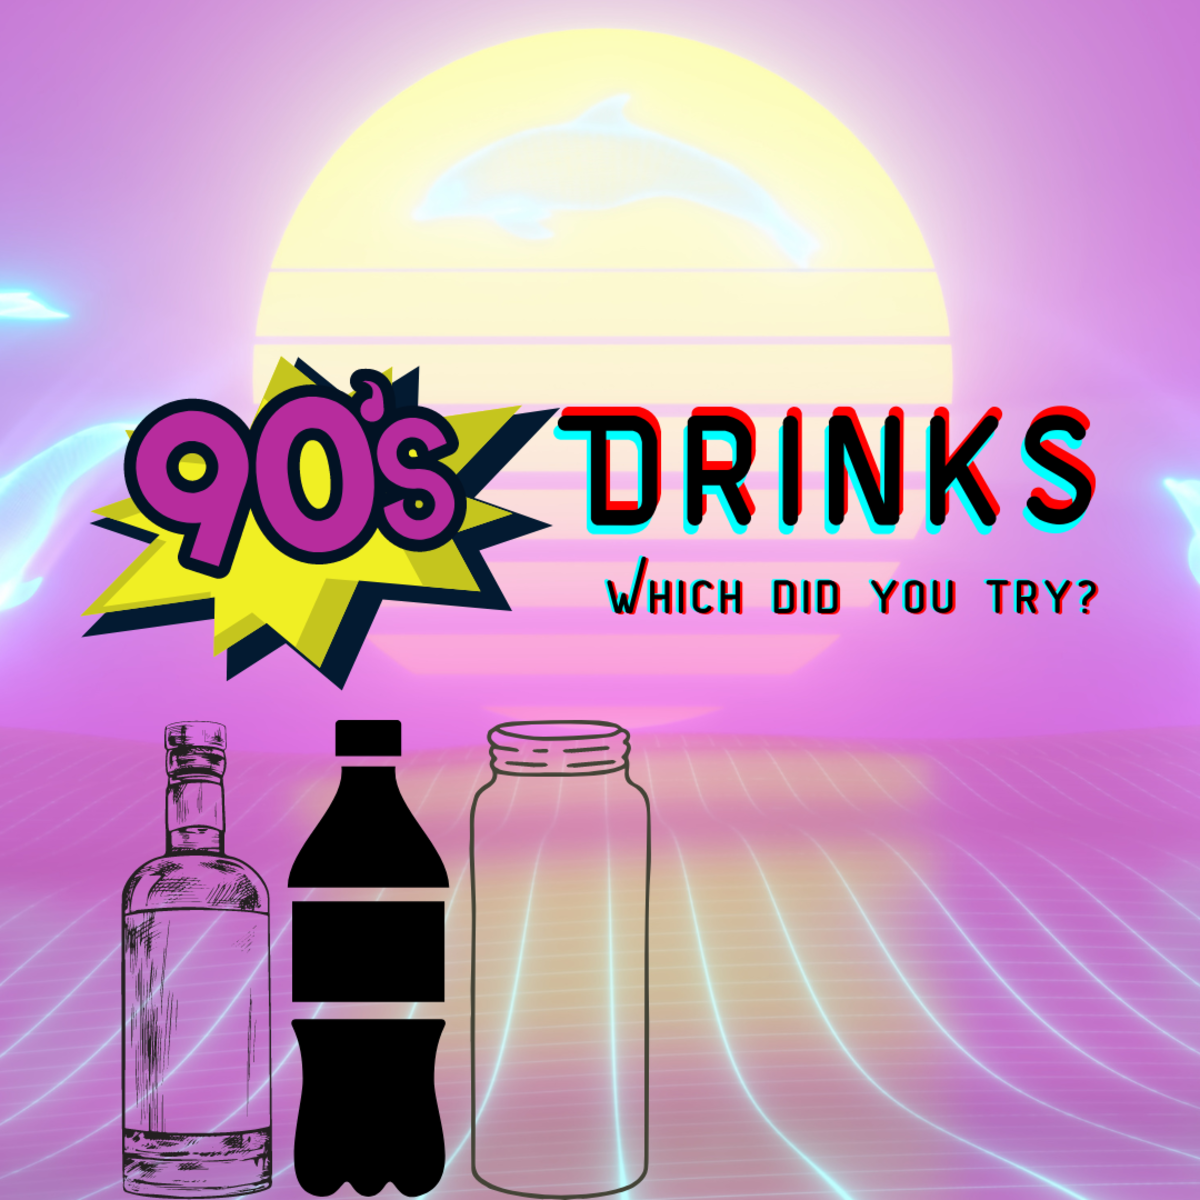 How Many of These Classic '90s Drinks Did You Try?